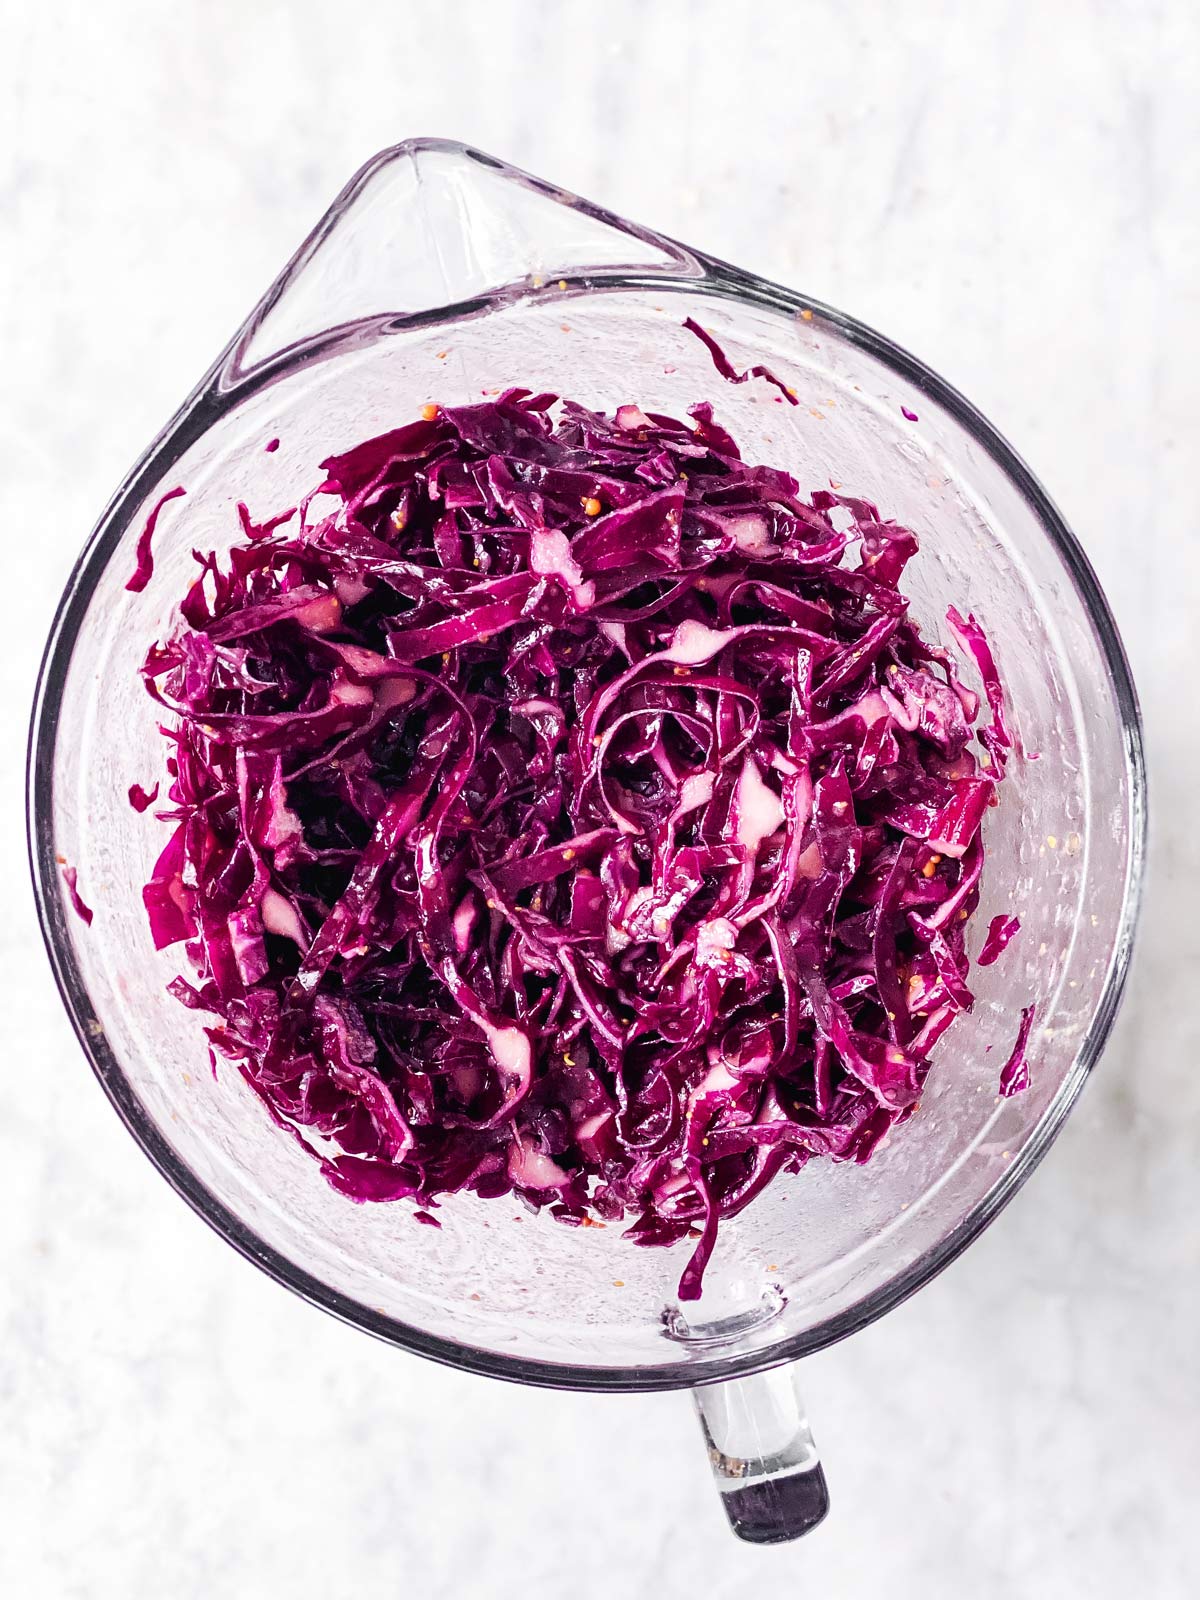 massaged shredded red cabbage in glass bowl